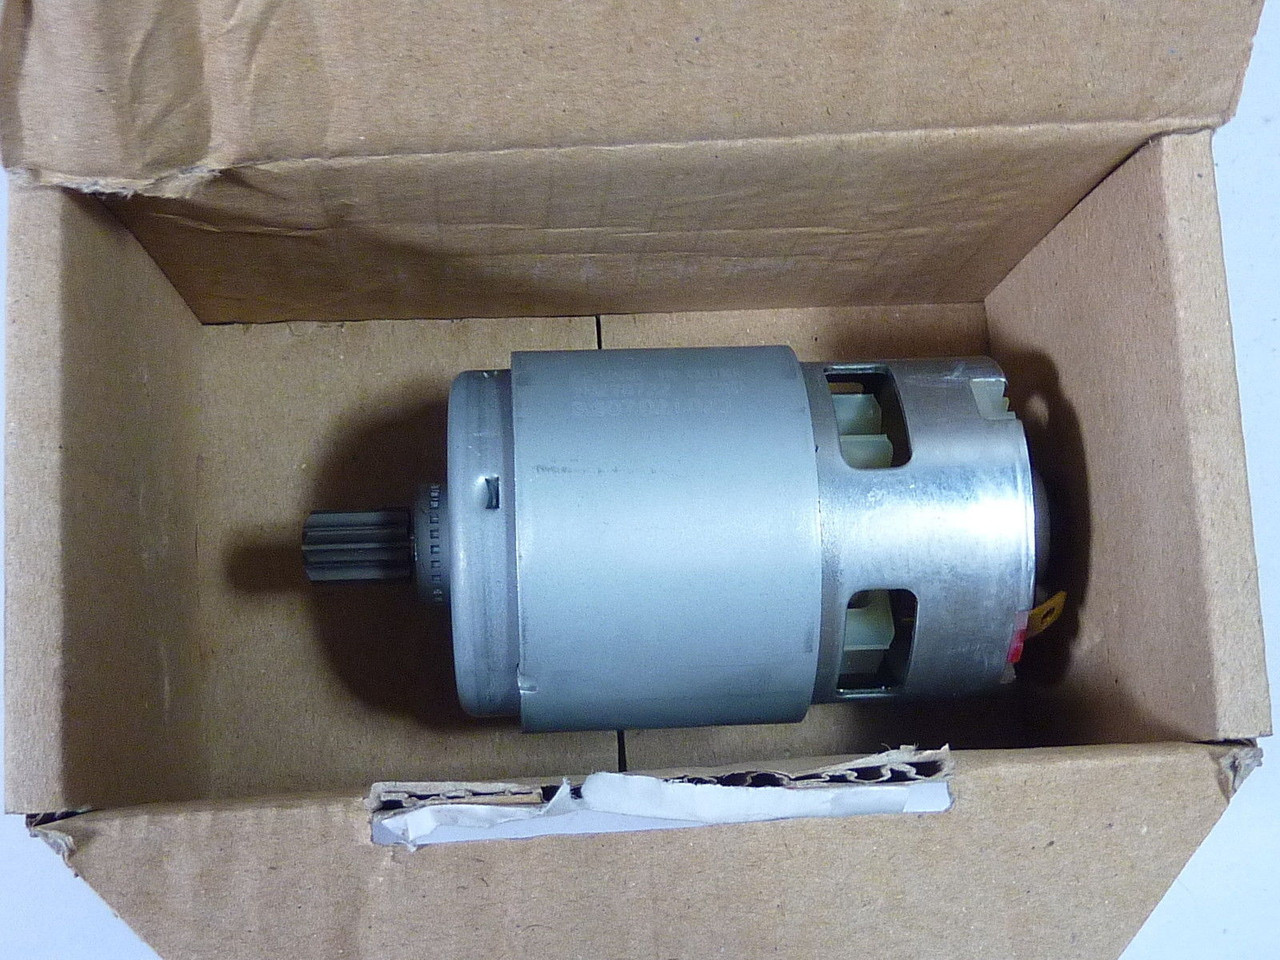 Bosch 3607031579 DC Motor For Impact Driver/Wrench 12V ! NEW !